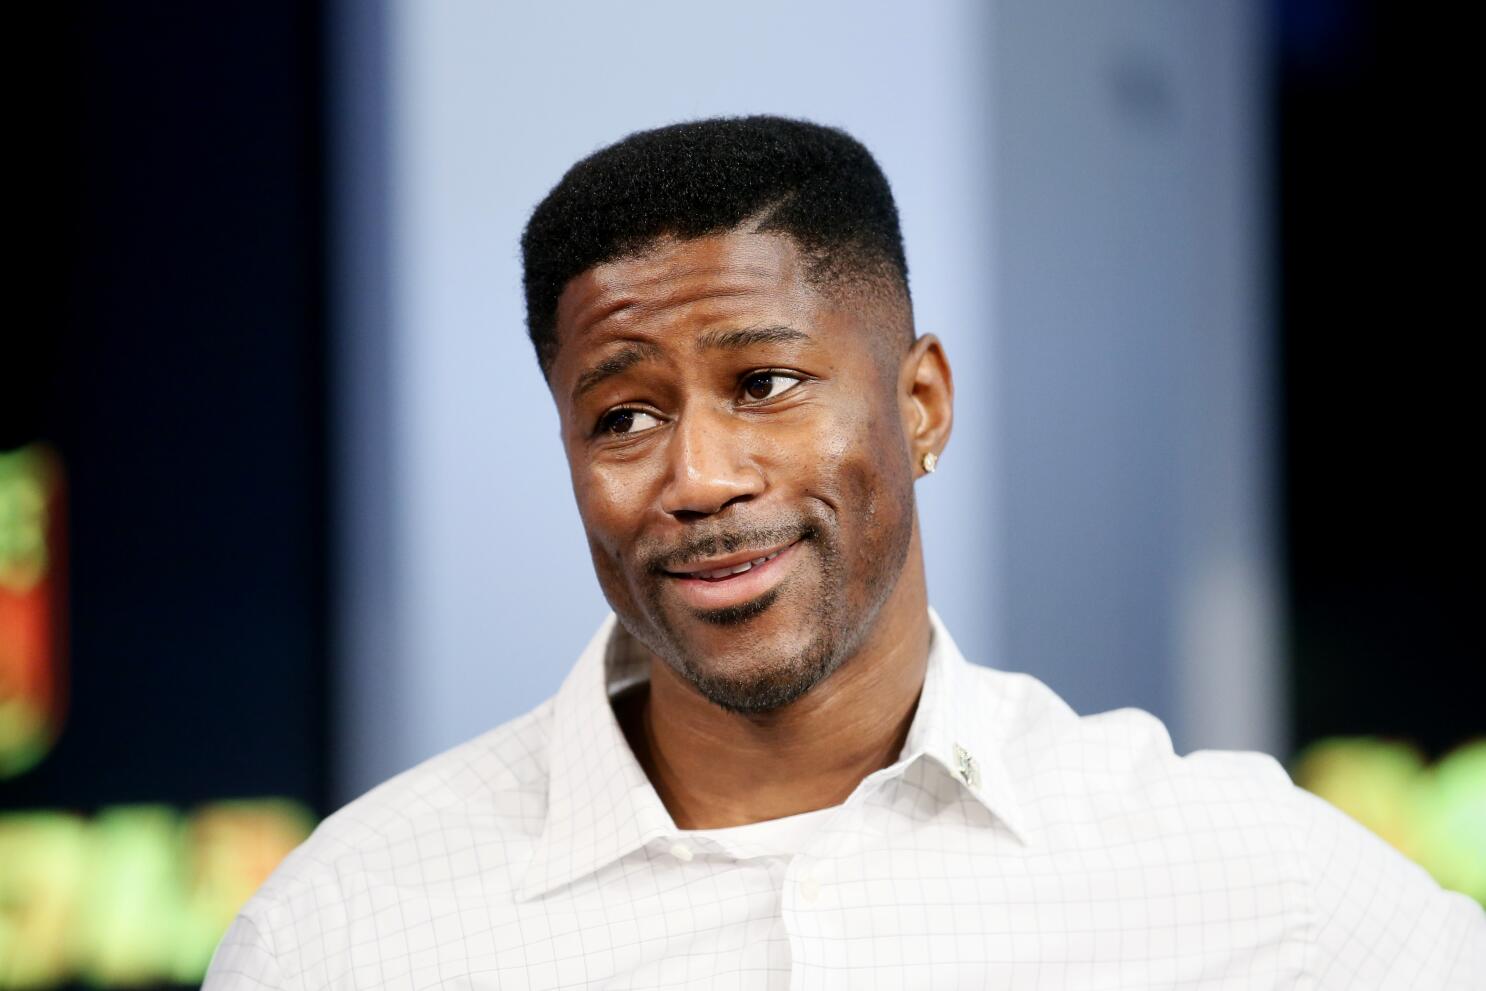 NFL Network's Nate Burleson Joins 'CBS This Morning' as New Anchor